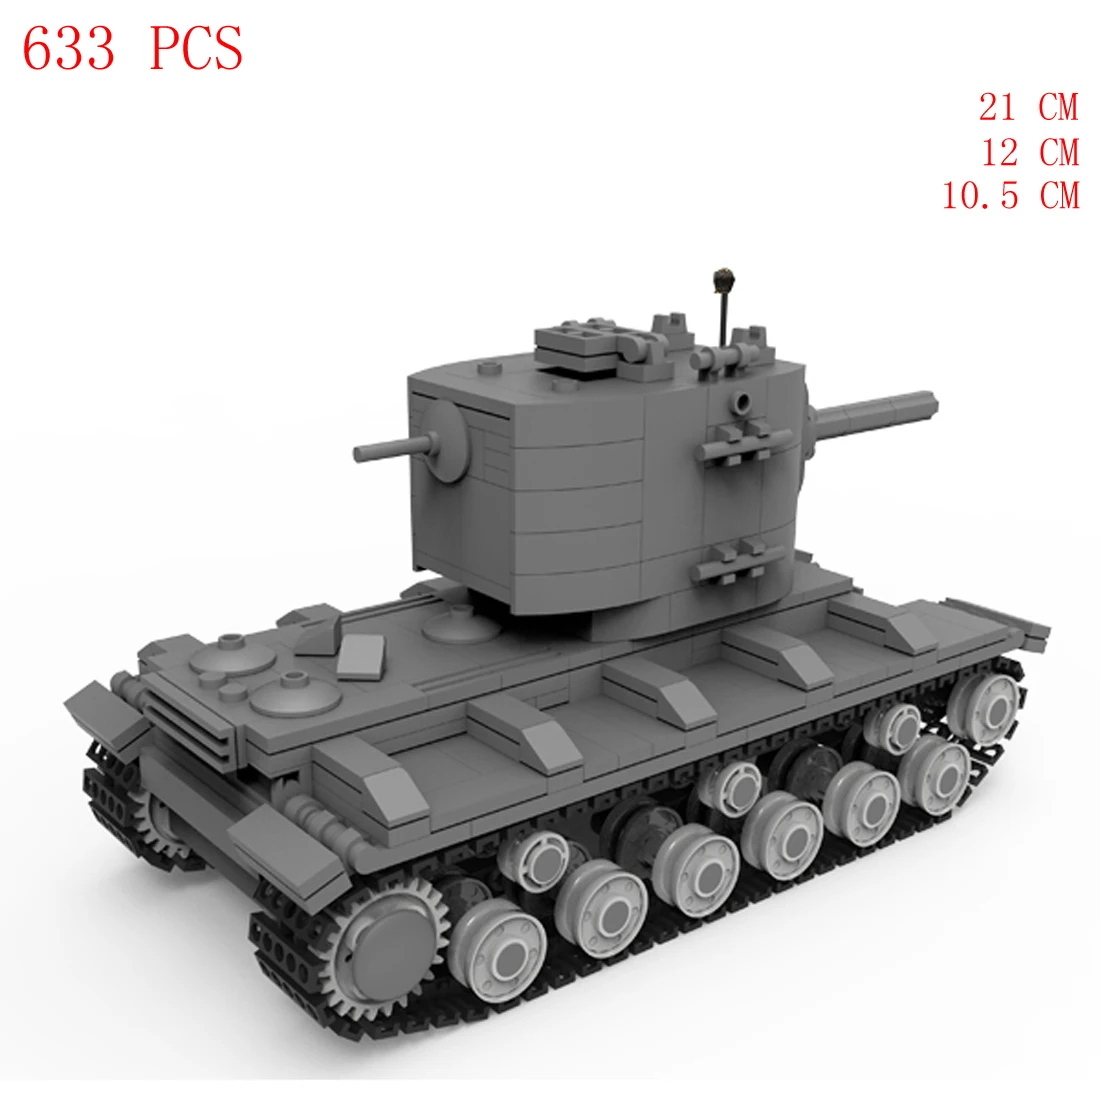 

hot military WWII Soviet Army technical KV-2 Heavy Panzer tank vehicles self defense war Building Blocks weapons brick toys gift